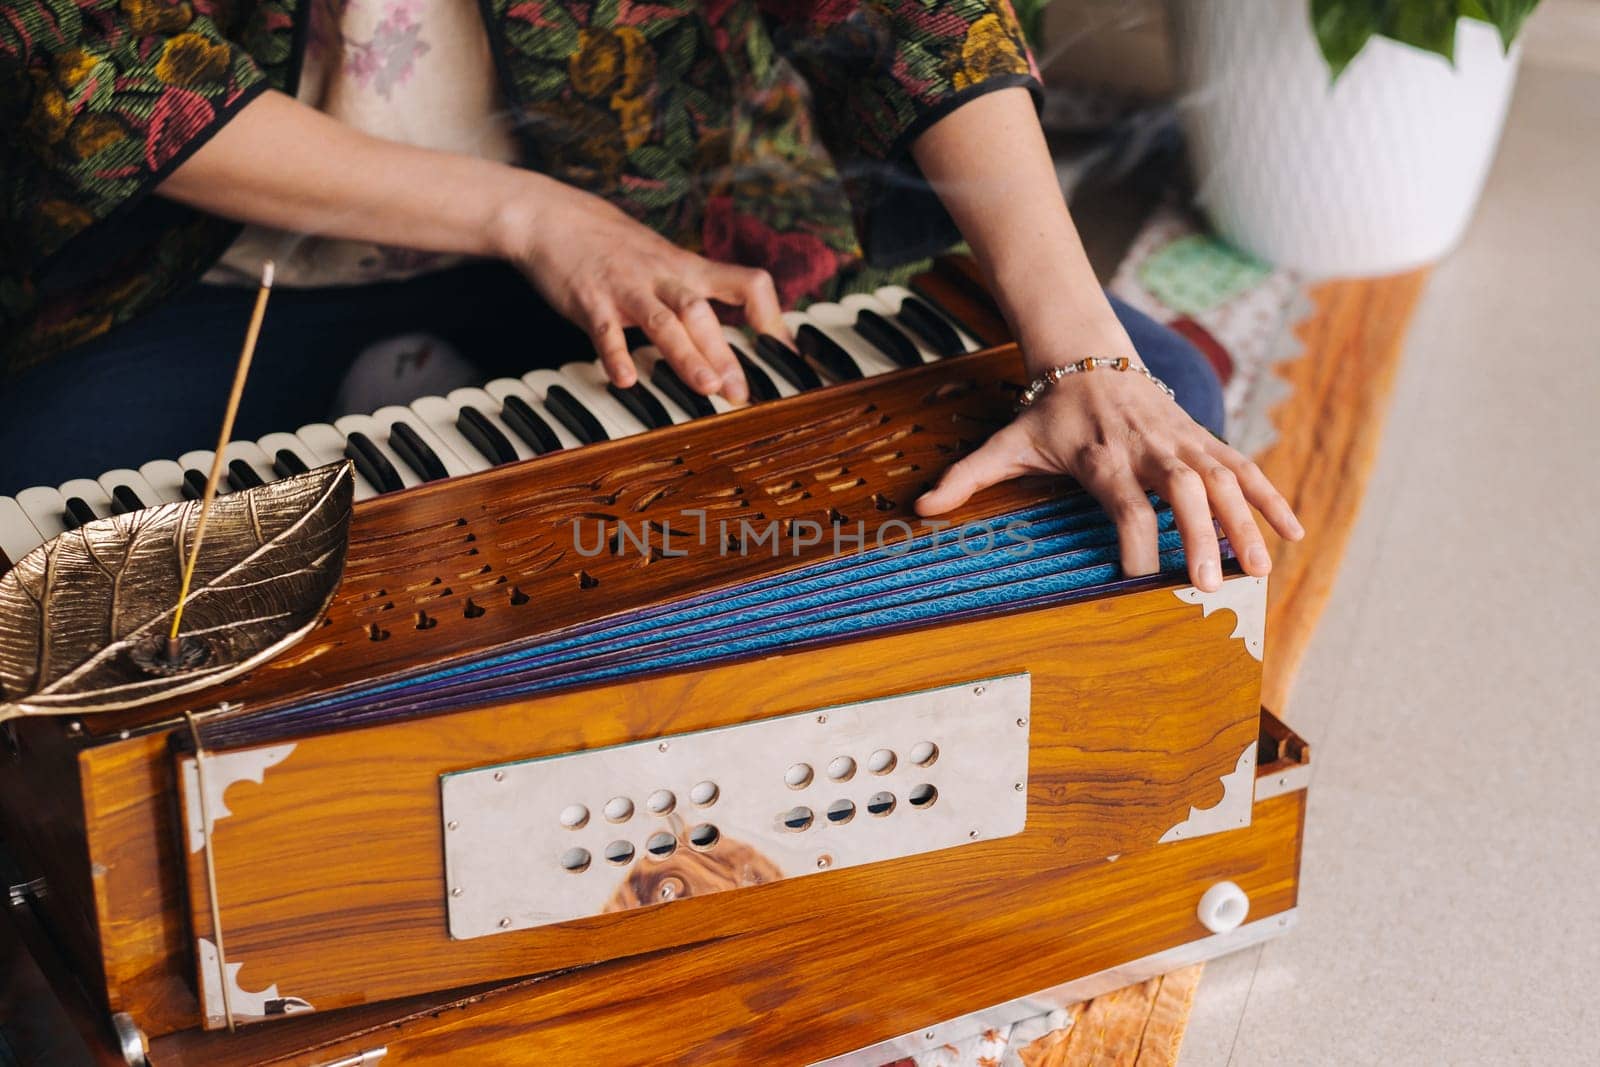 Hands of a woman sitting on the floor and playing the harmonium during the practice of kundalini yoga.